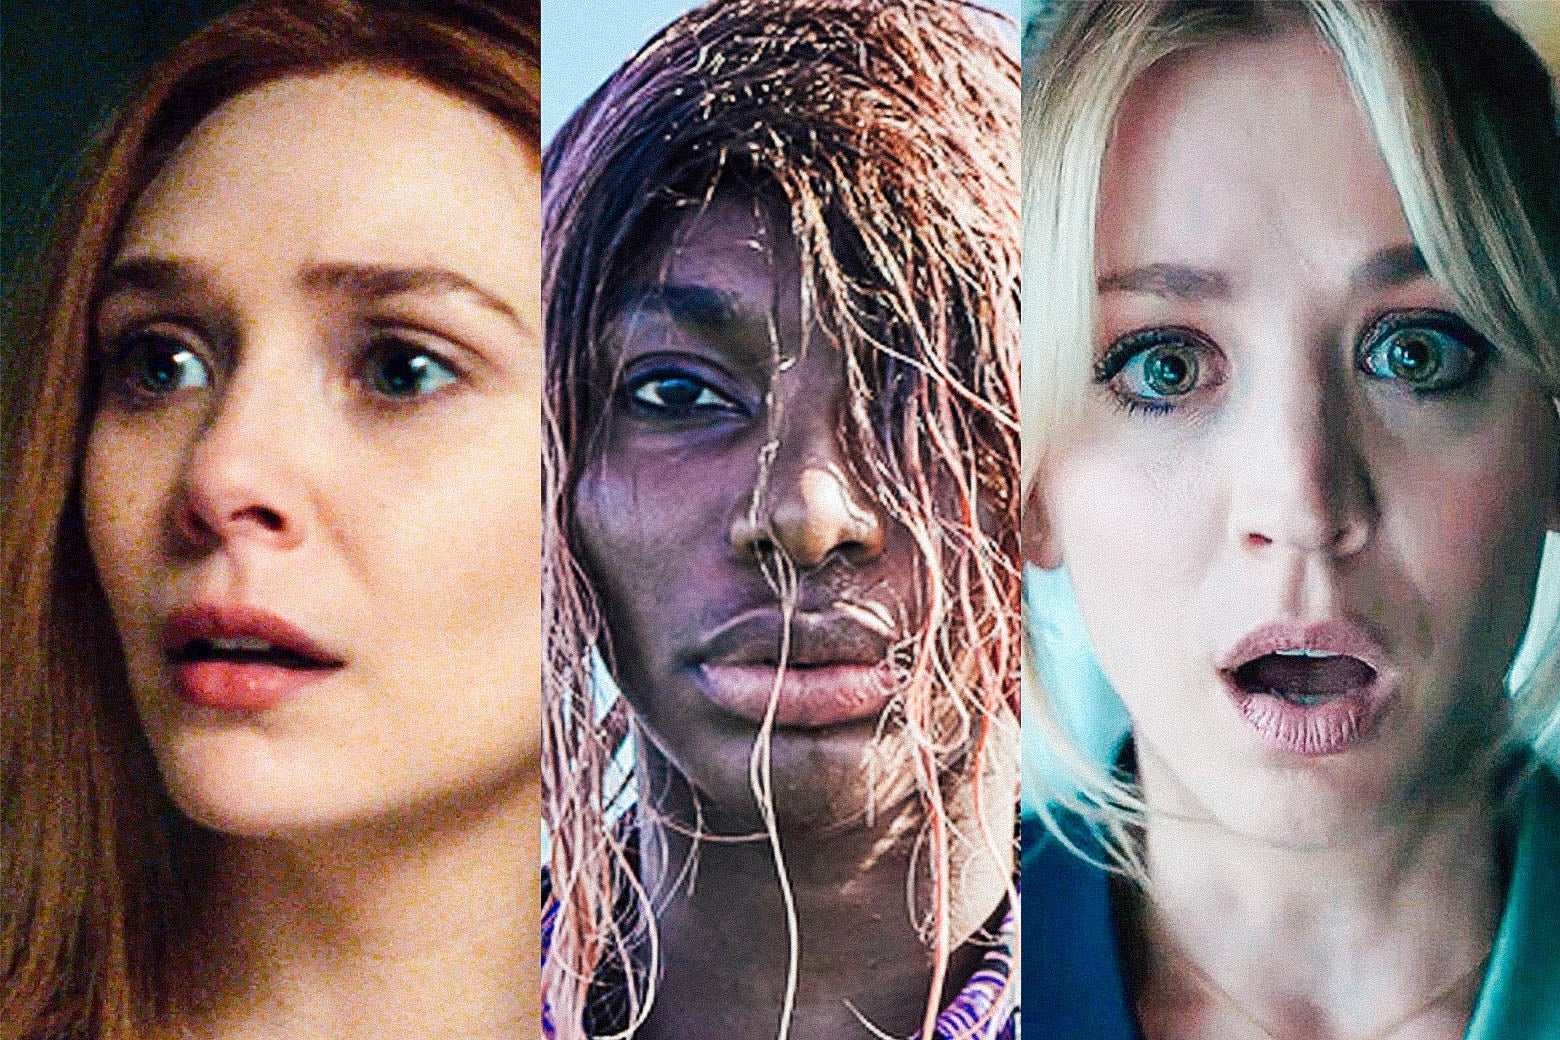 Triptych of Elizabeth Olsen, Michaela Coel, and Kaley Cuoco in their respective shows